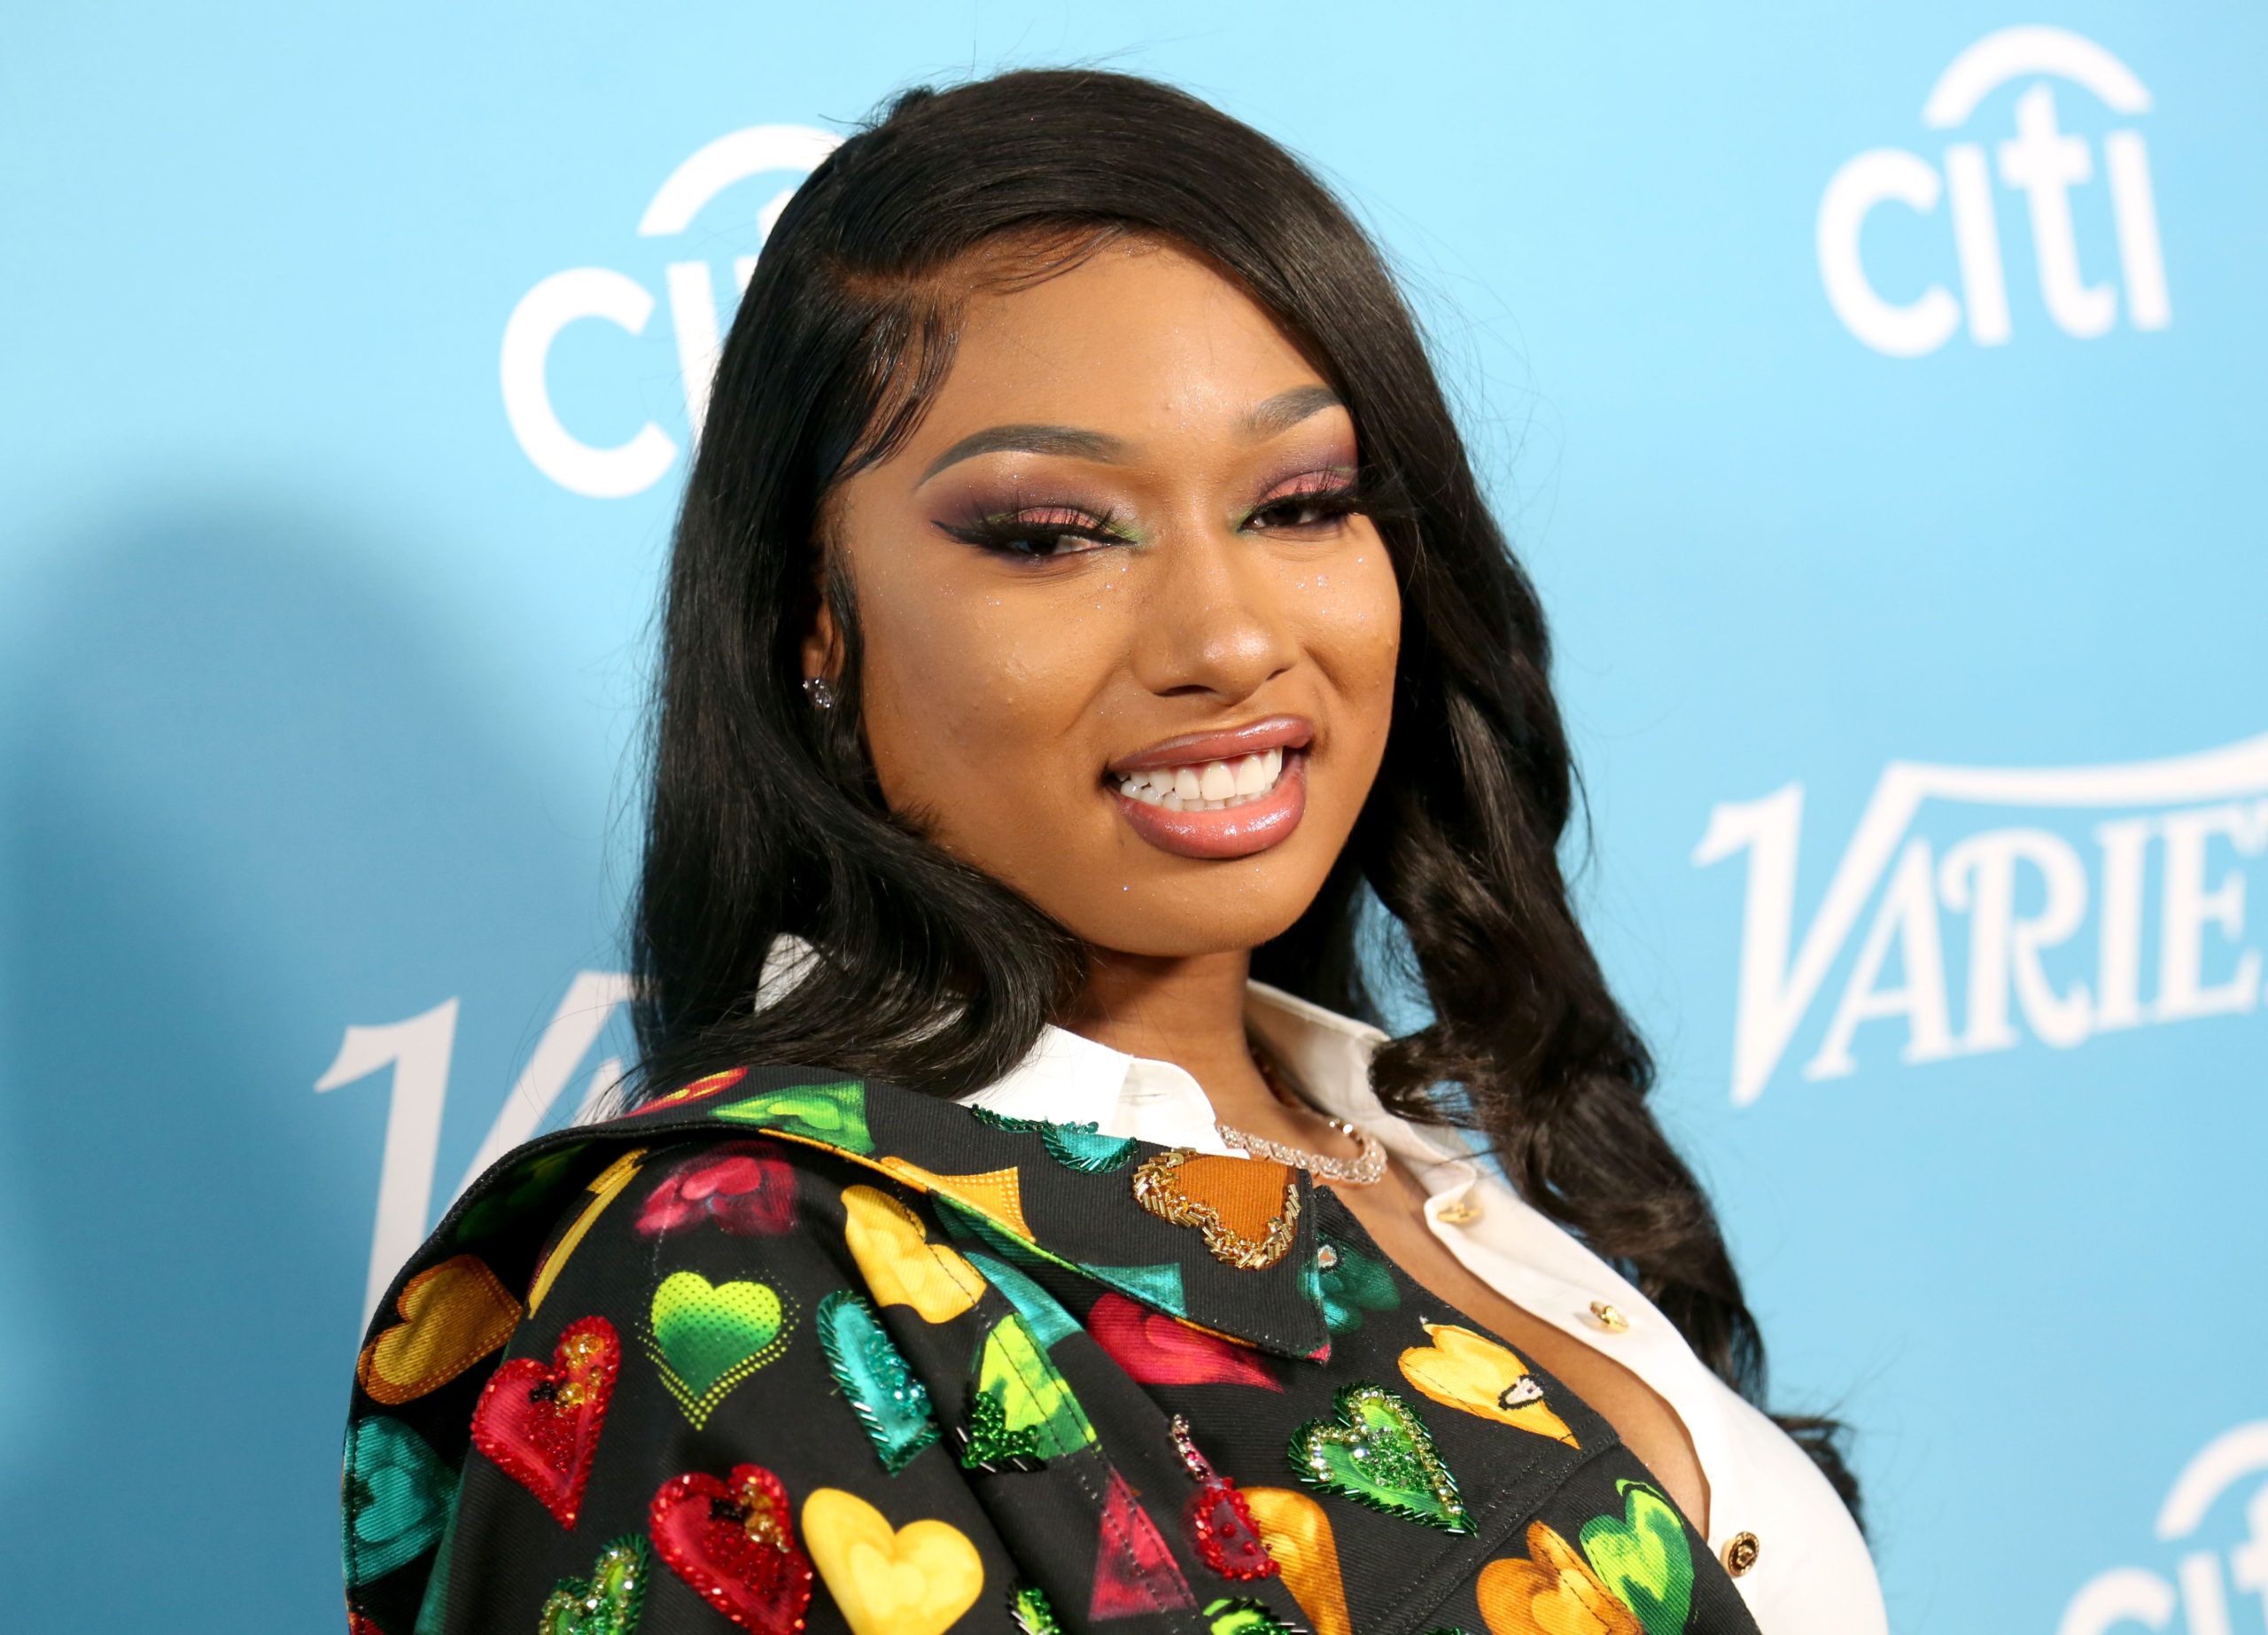 Megan Thee Stallion Joins Forces With Disaster Relief Organization To Rebuild Houston Following Winter Storm